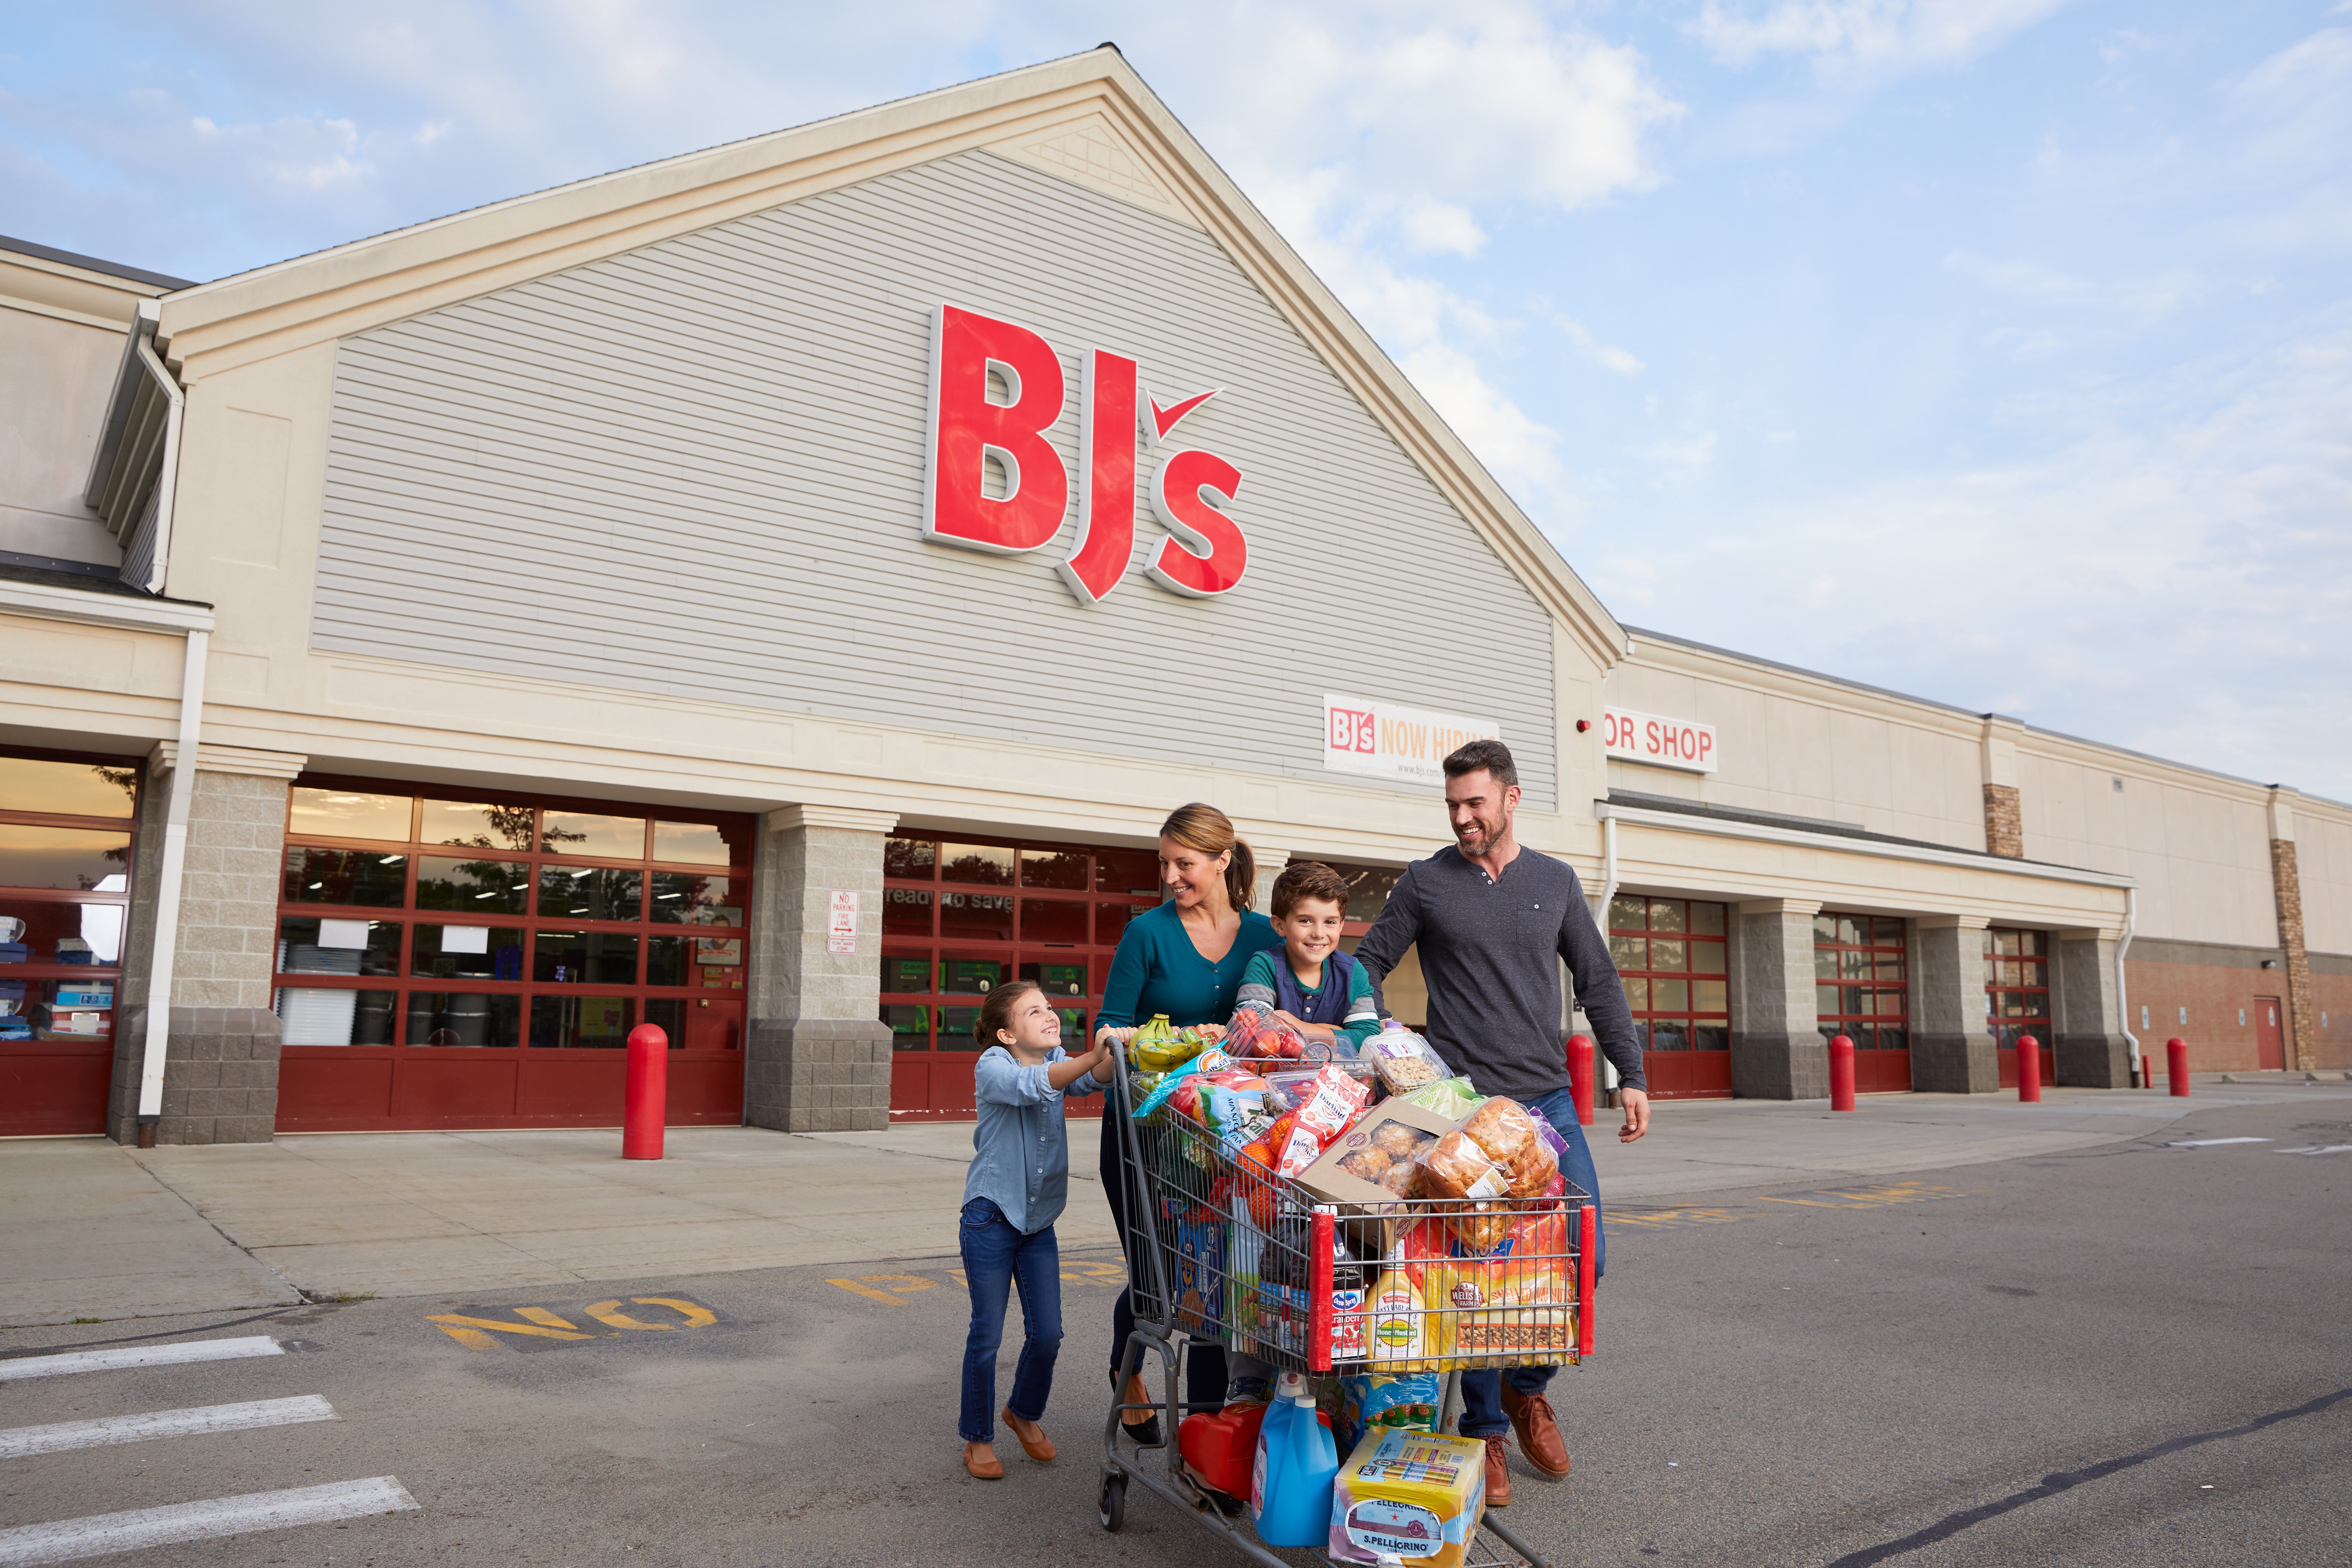 Sales inch up in Q3 at BJ's Wholesale Club